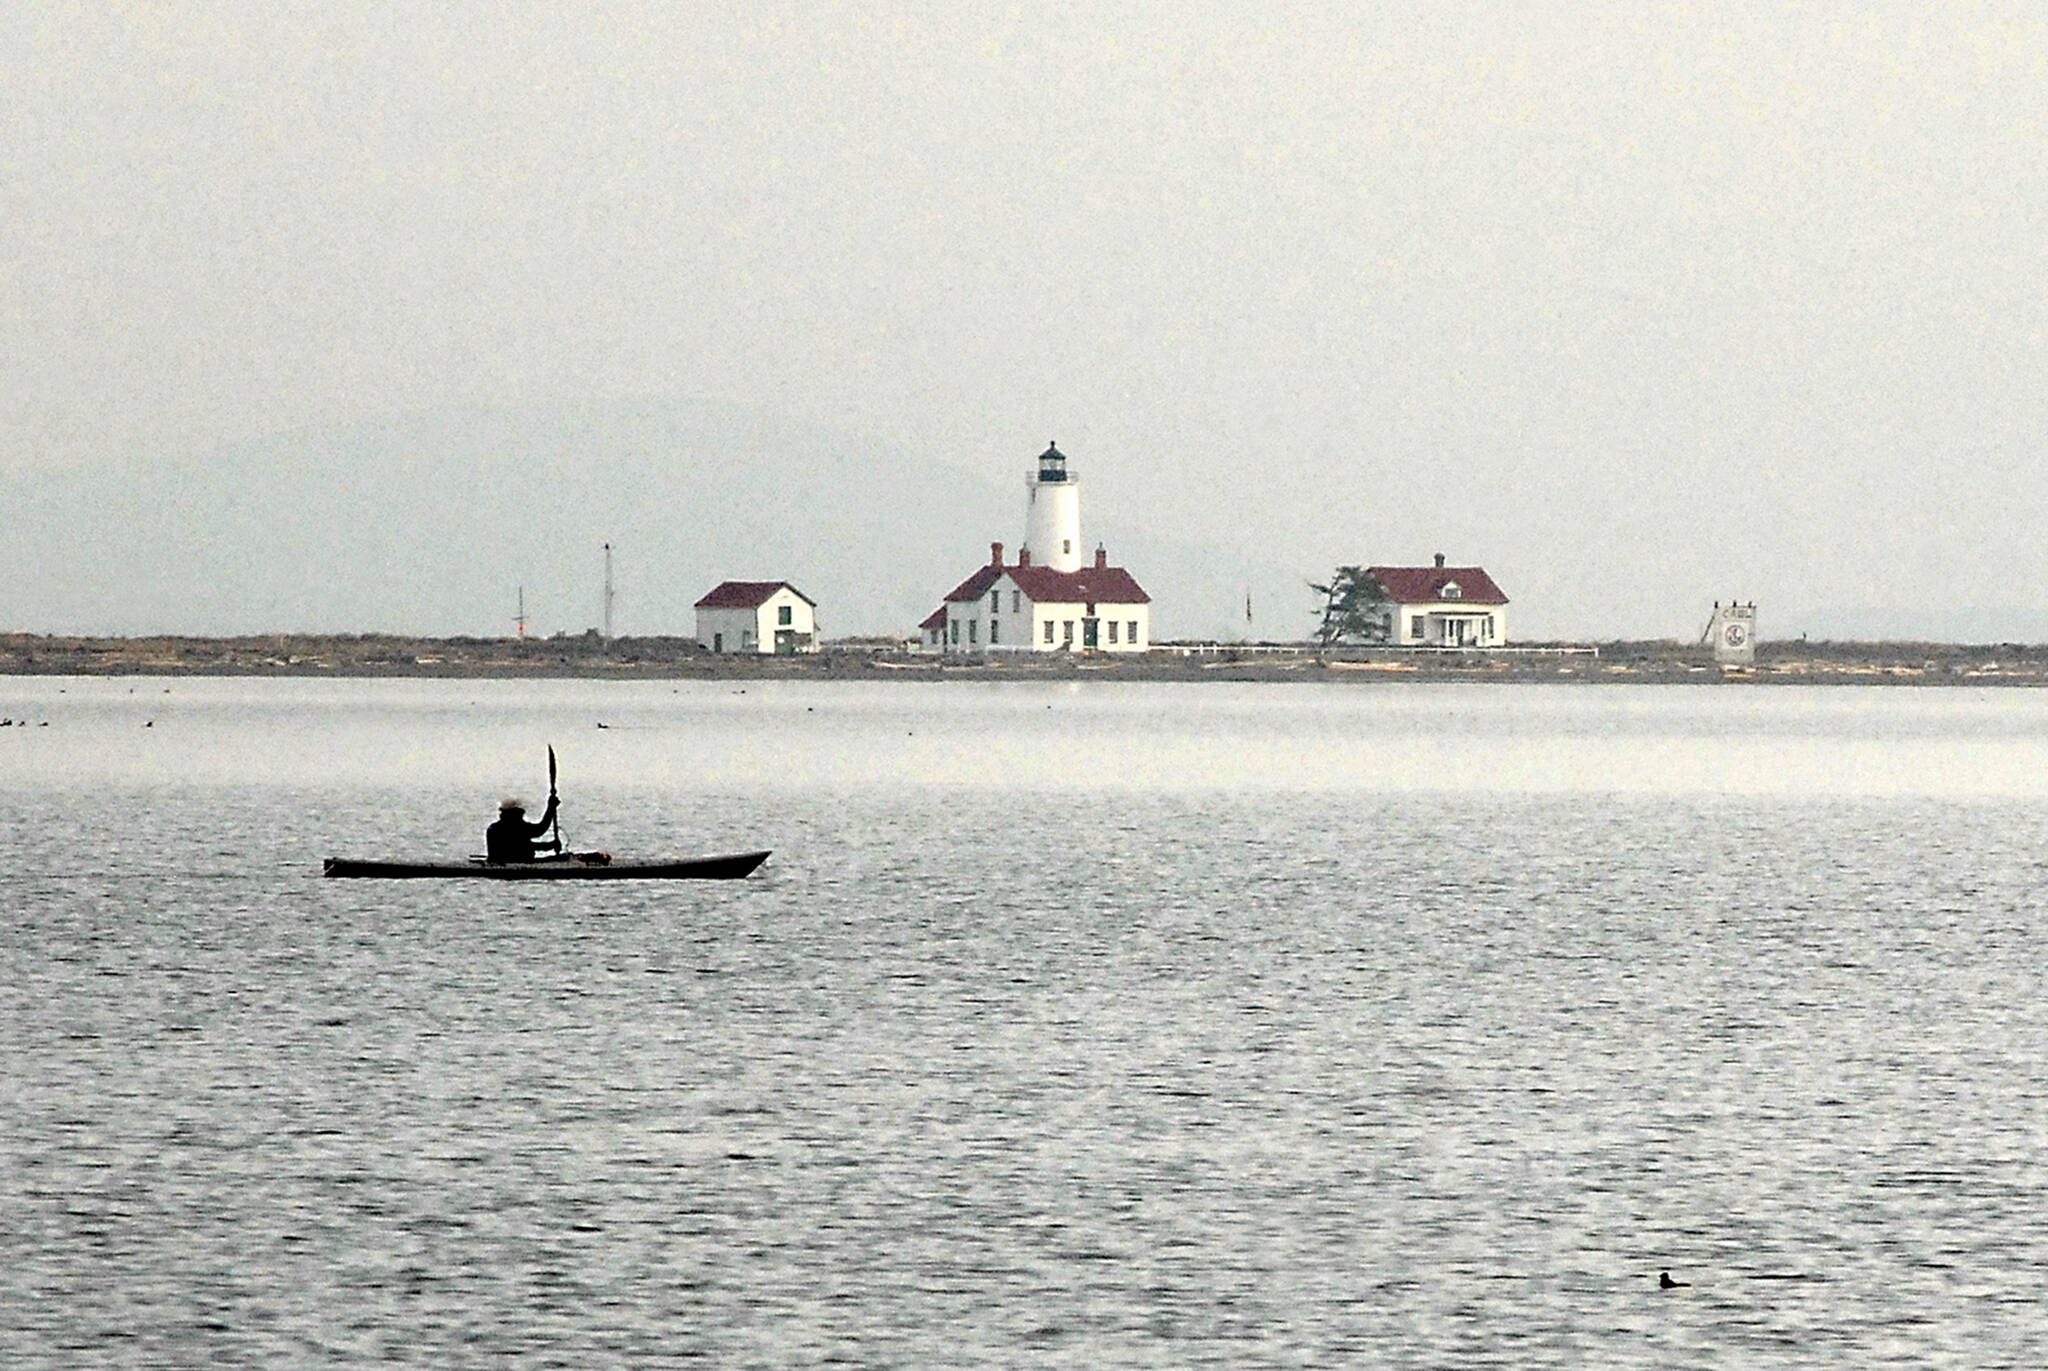 Ken Lincoln of Port Townsend kayaks across Dungeness Bay against a backdrop of the New Dungeness Lighthouse on Saturday north of Sequim. Lincoln said he was paddling out from Cline Spit to meet a group of other kayakers who were putting in at Port Williams. (Keith Thorpe/Peninsula Daily News)